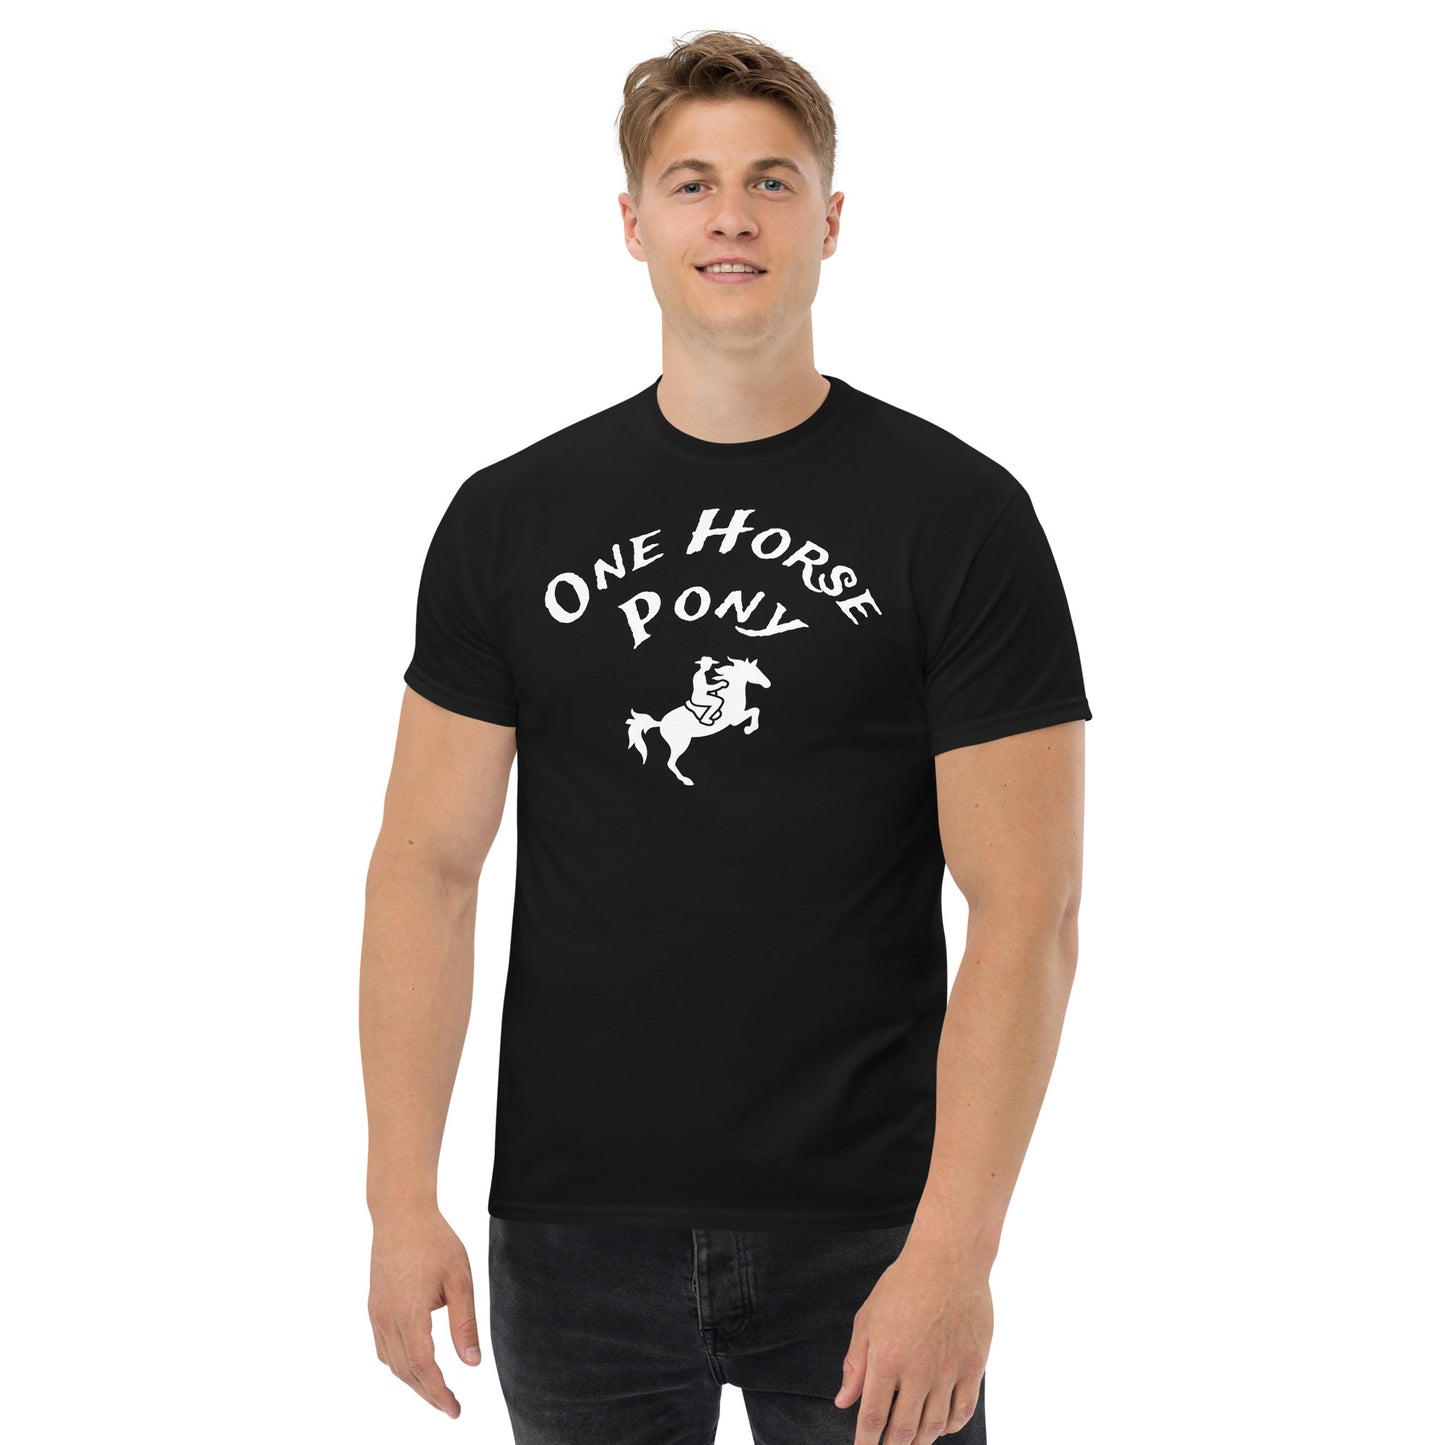 The A&G One Horse Pony Tee